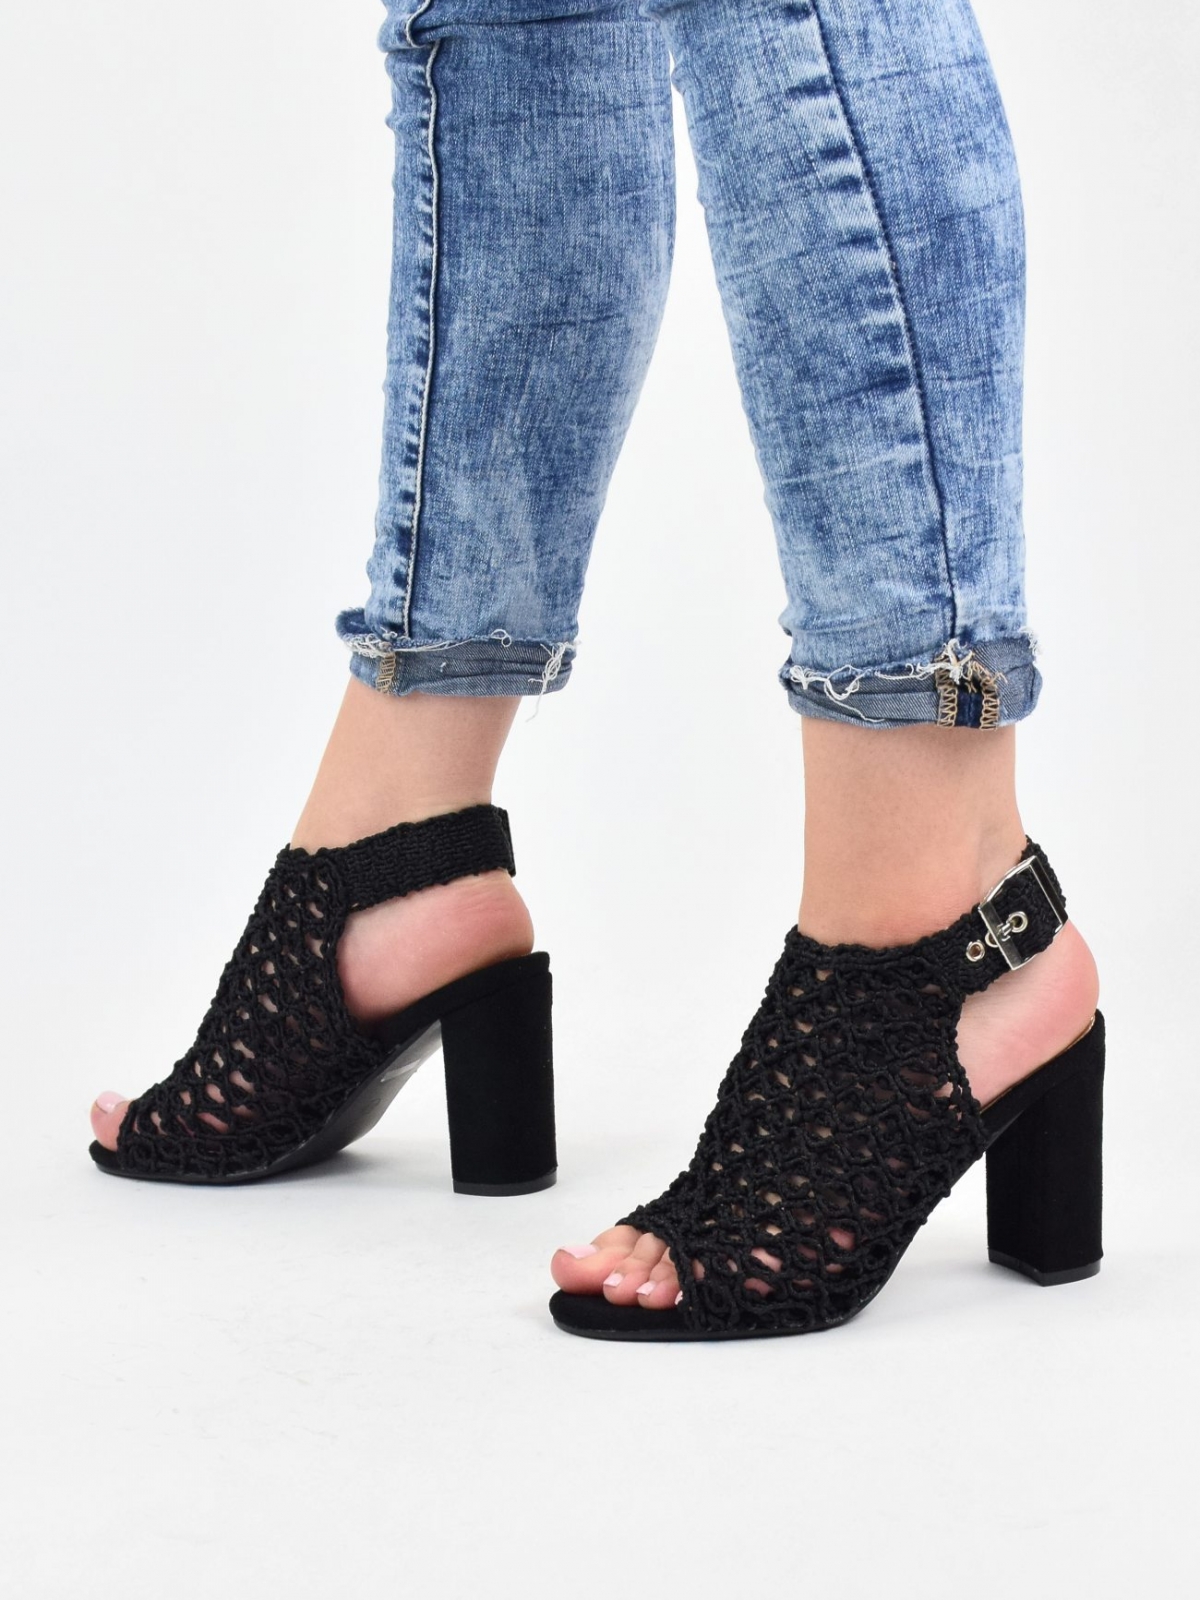 Knitted open-toed sandals in black